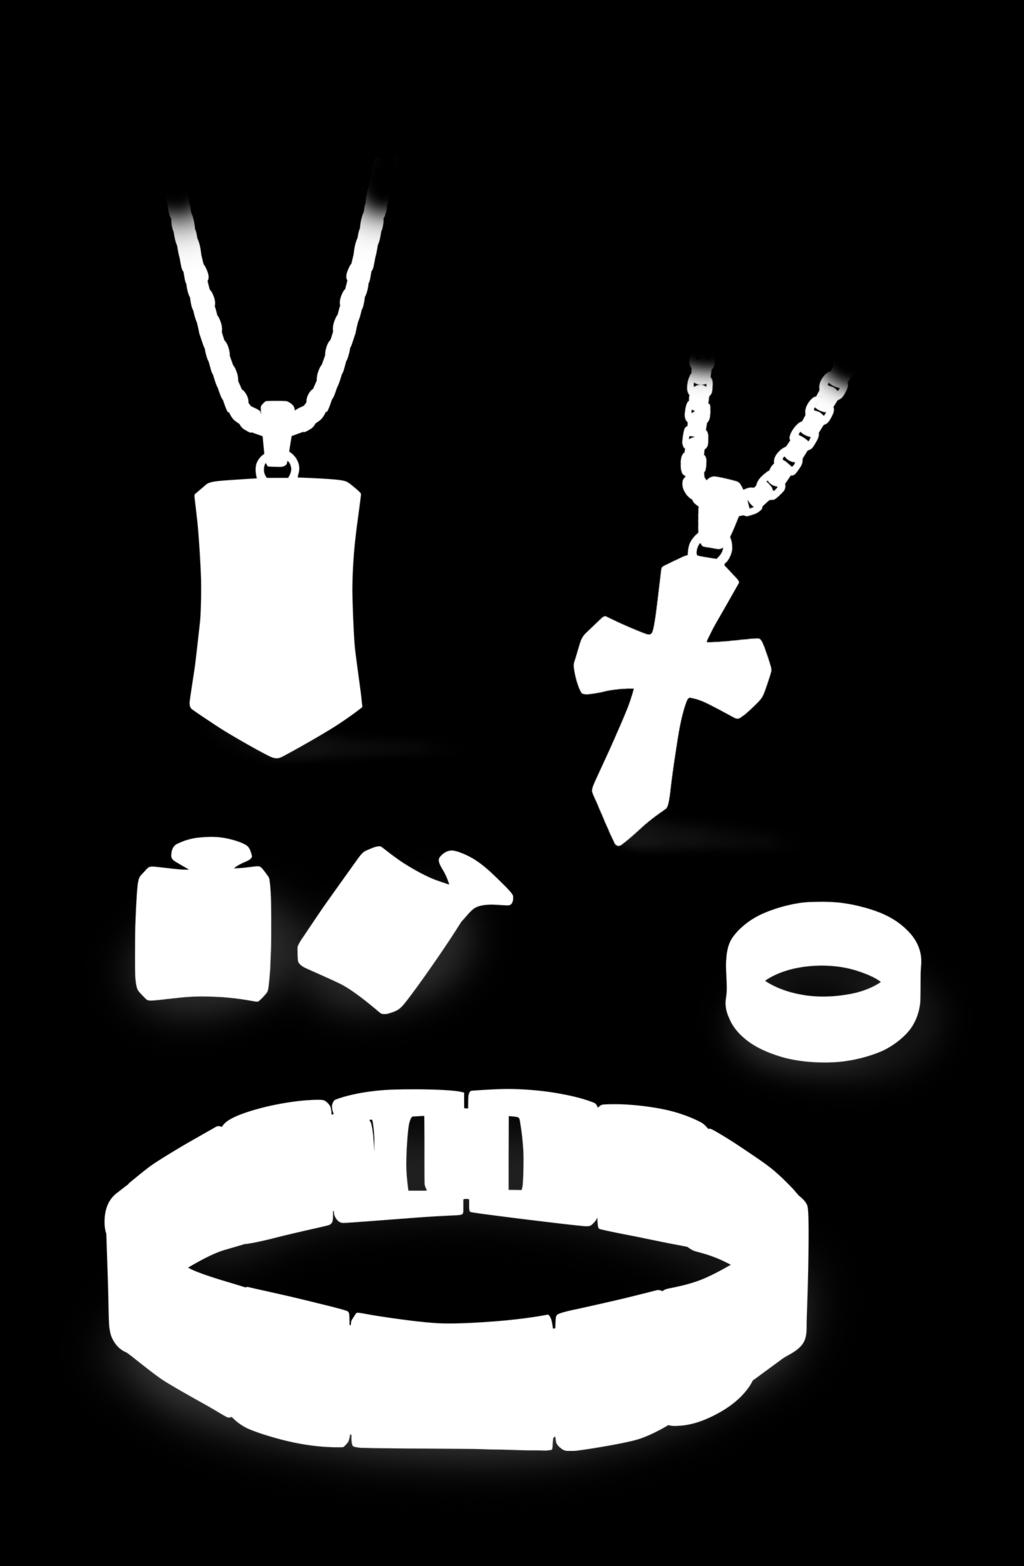 collection offers jewelry of dignified masculinity.